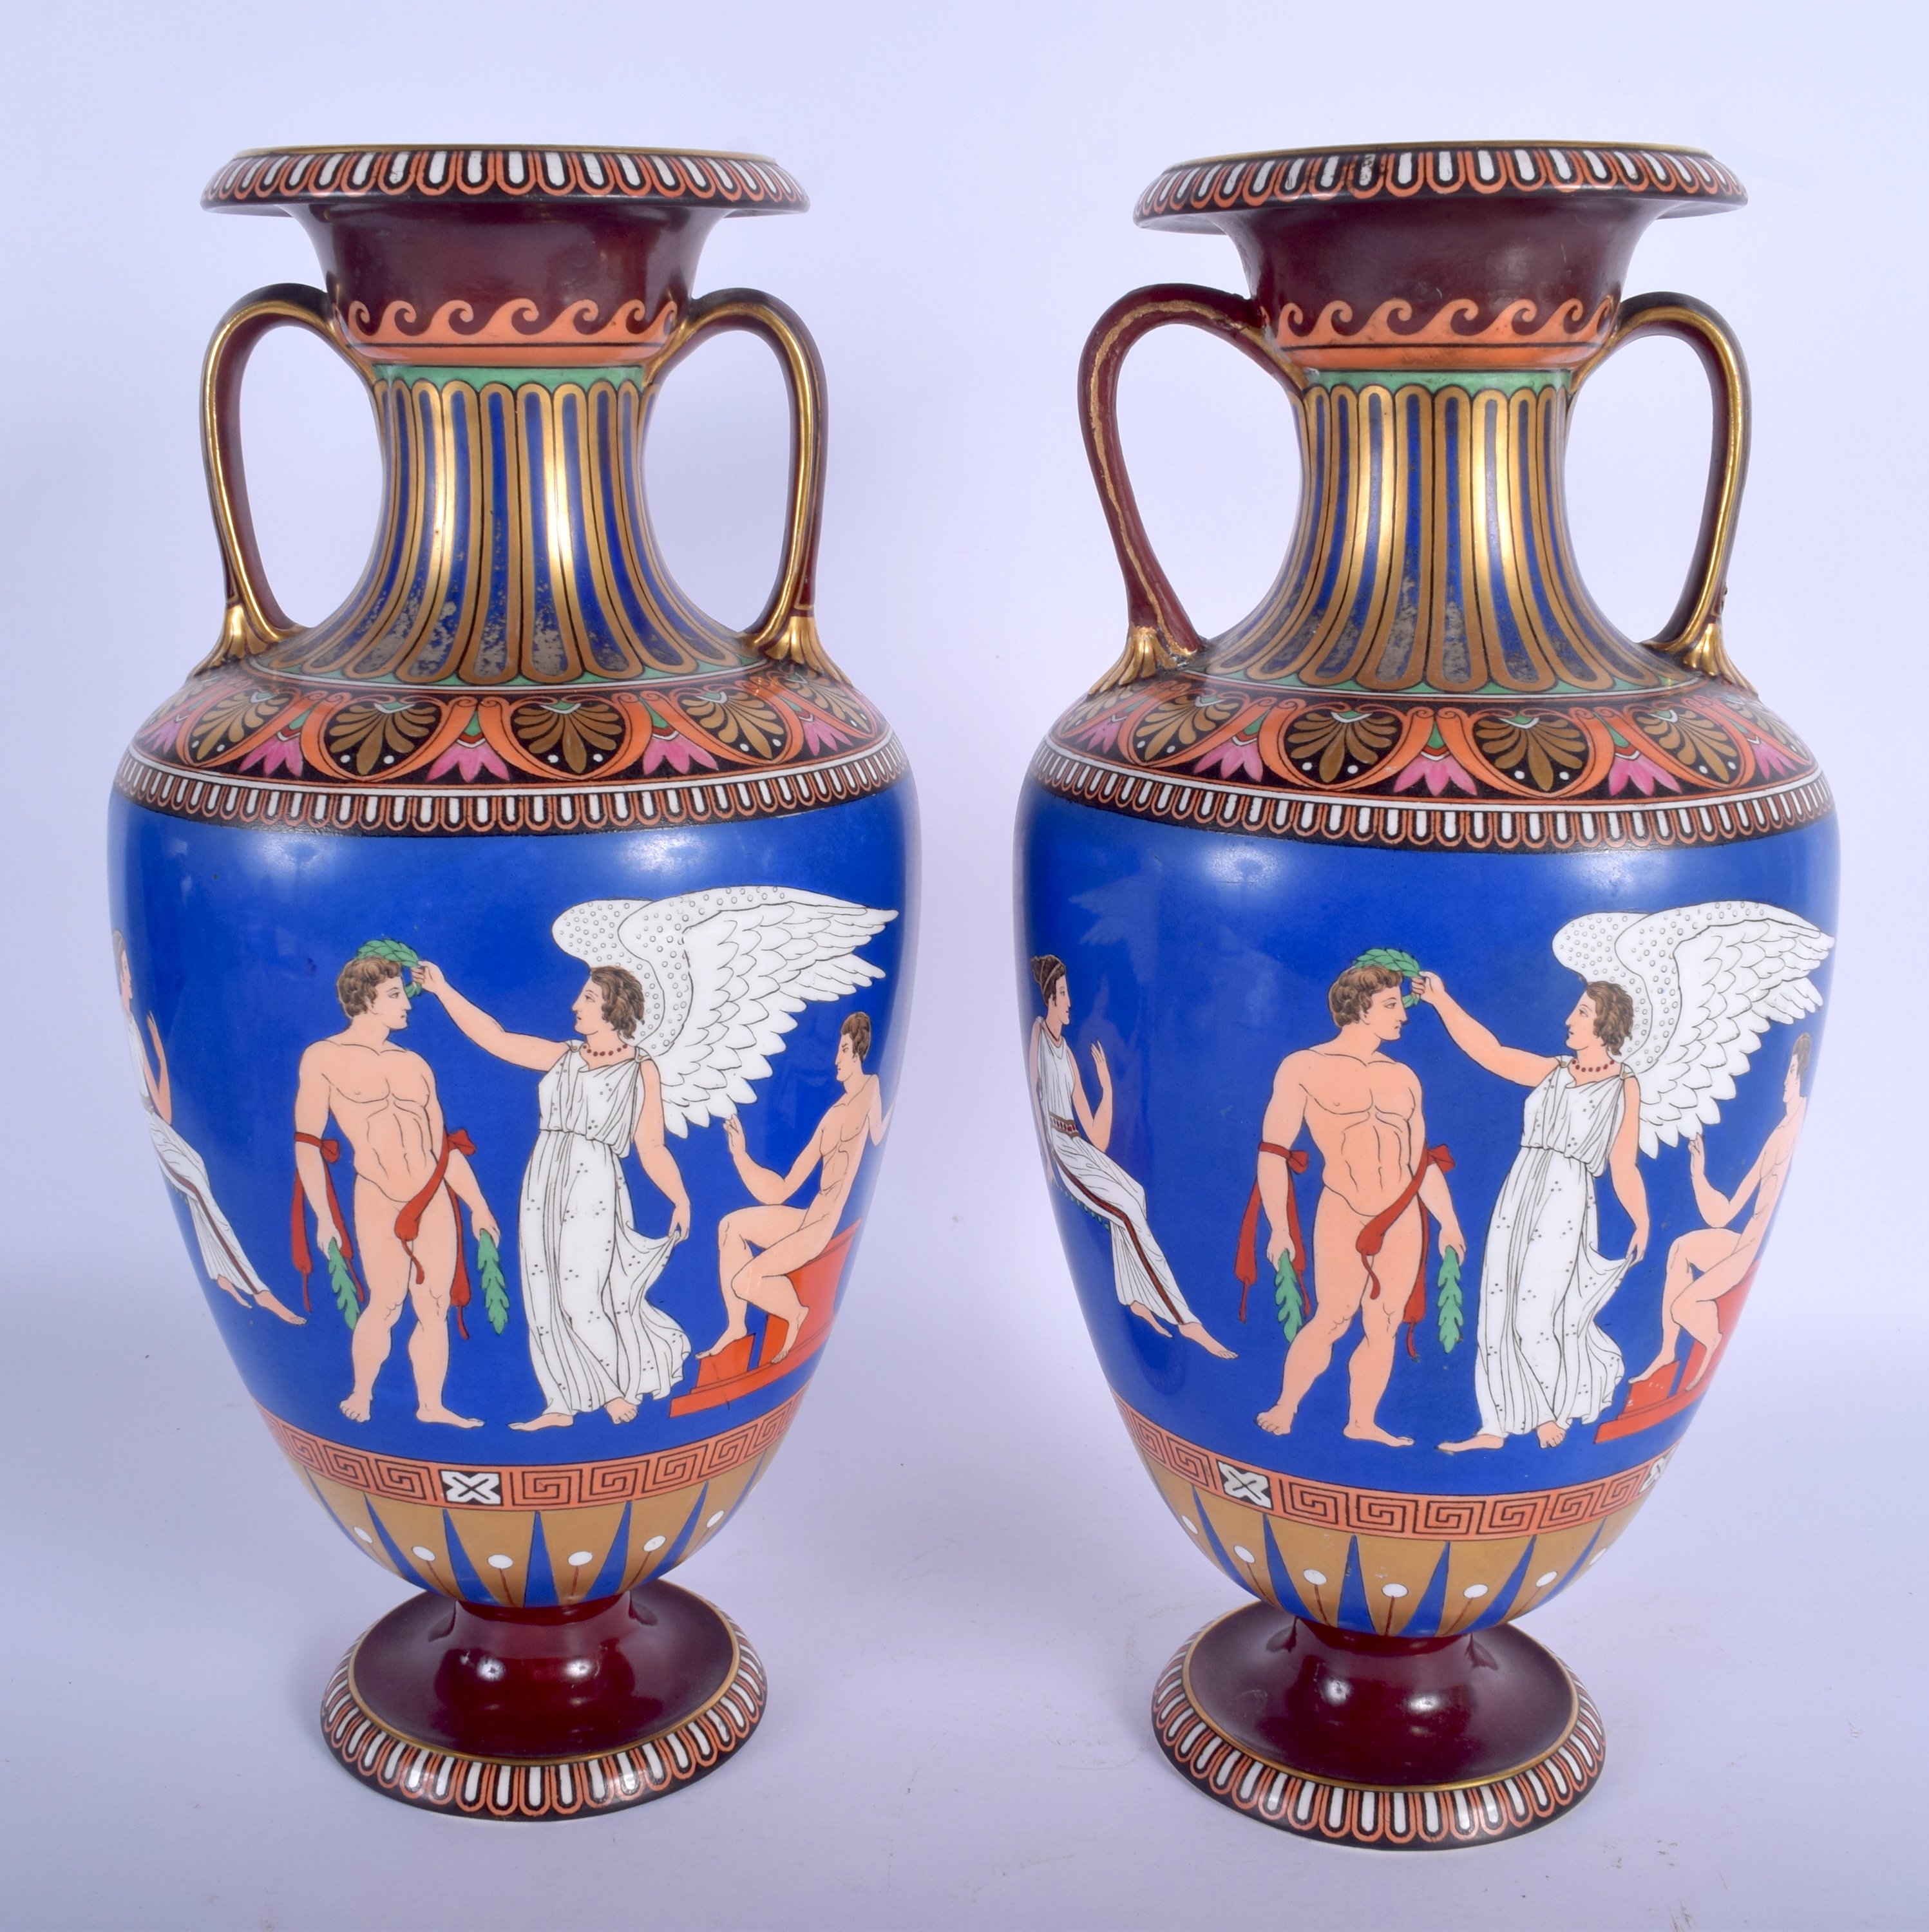 A PAIR OF 19TH CENTURY ENGLISH TWIN HANDLED ETRUSCAN REVIVAL VASES After the Antique, decorated with - Image 2 of 3